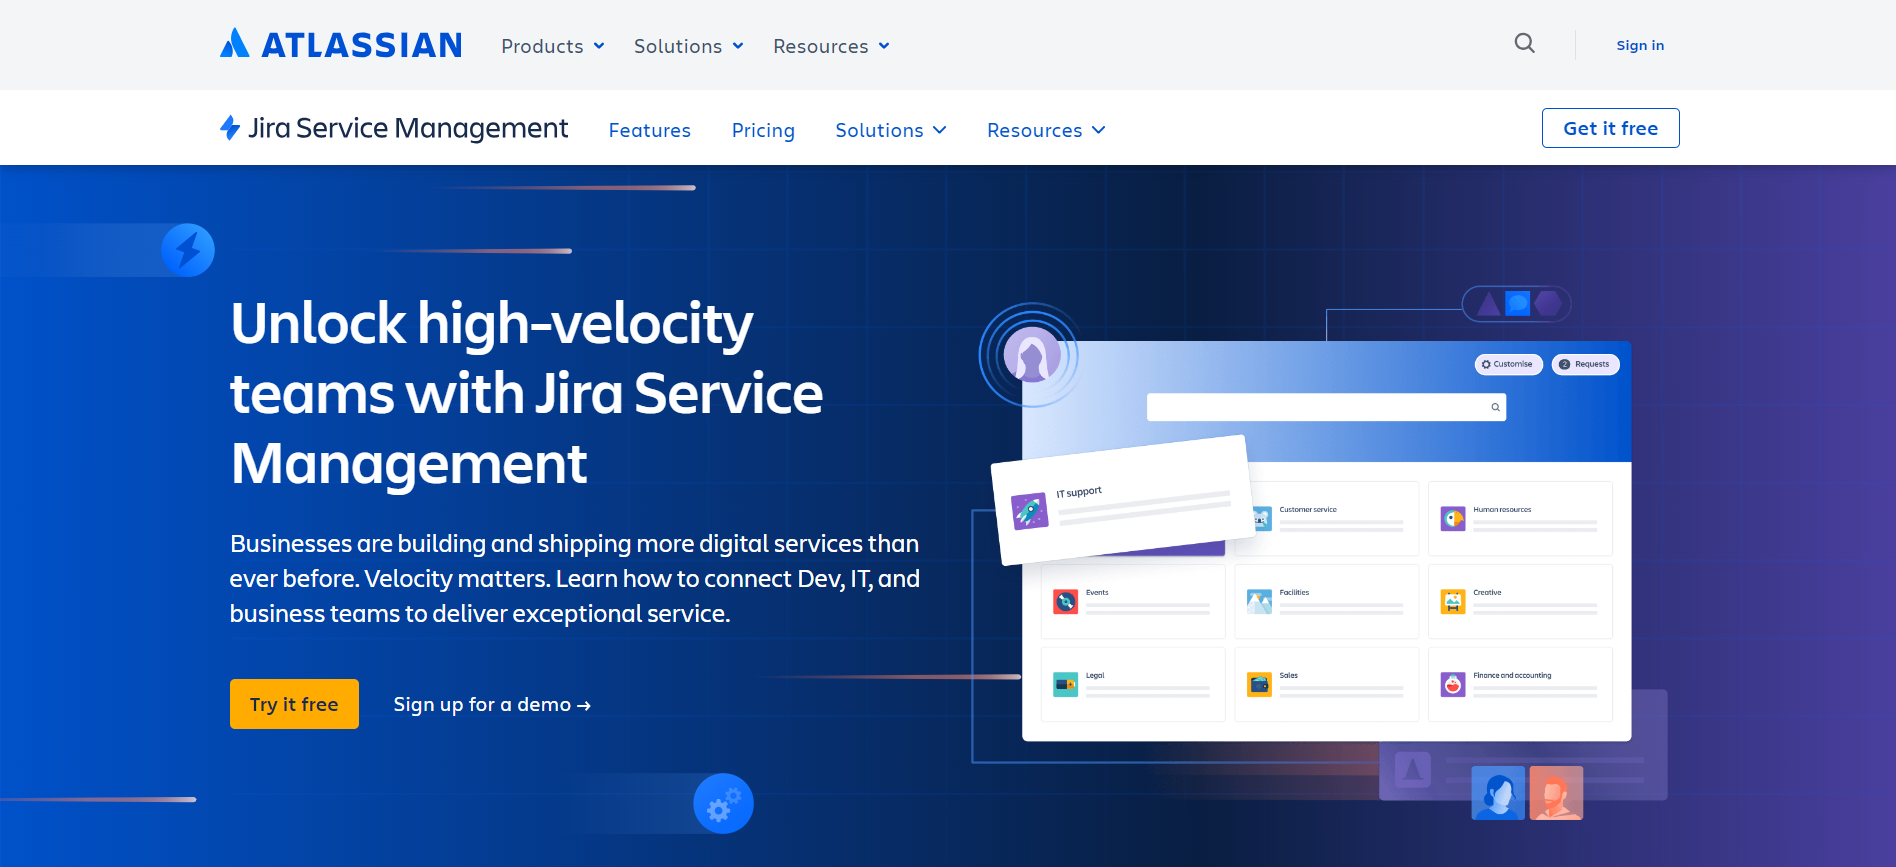 Jira service management atlassian solution for high velocity teams